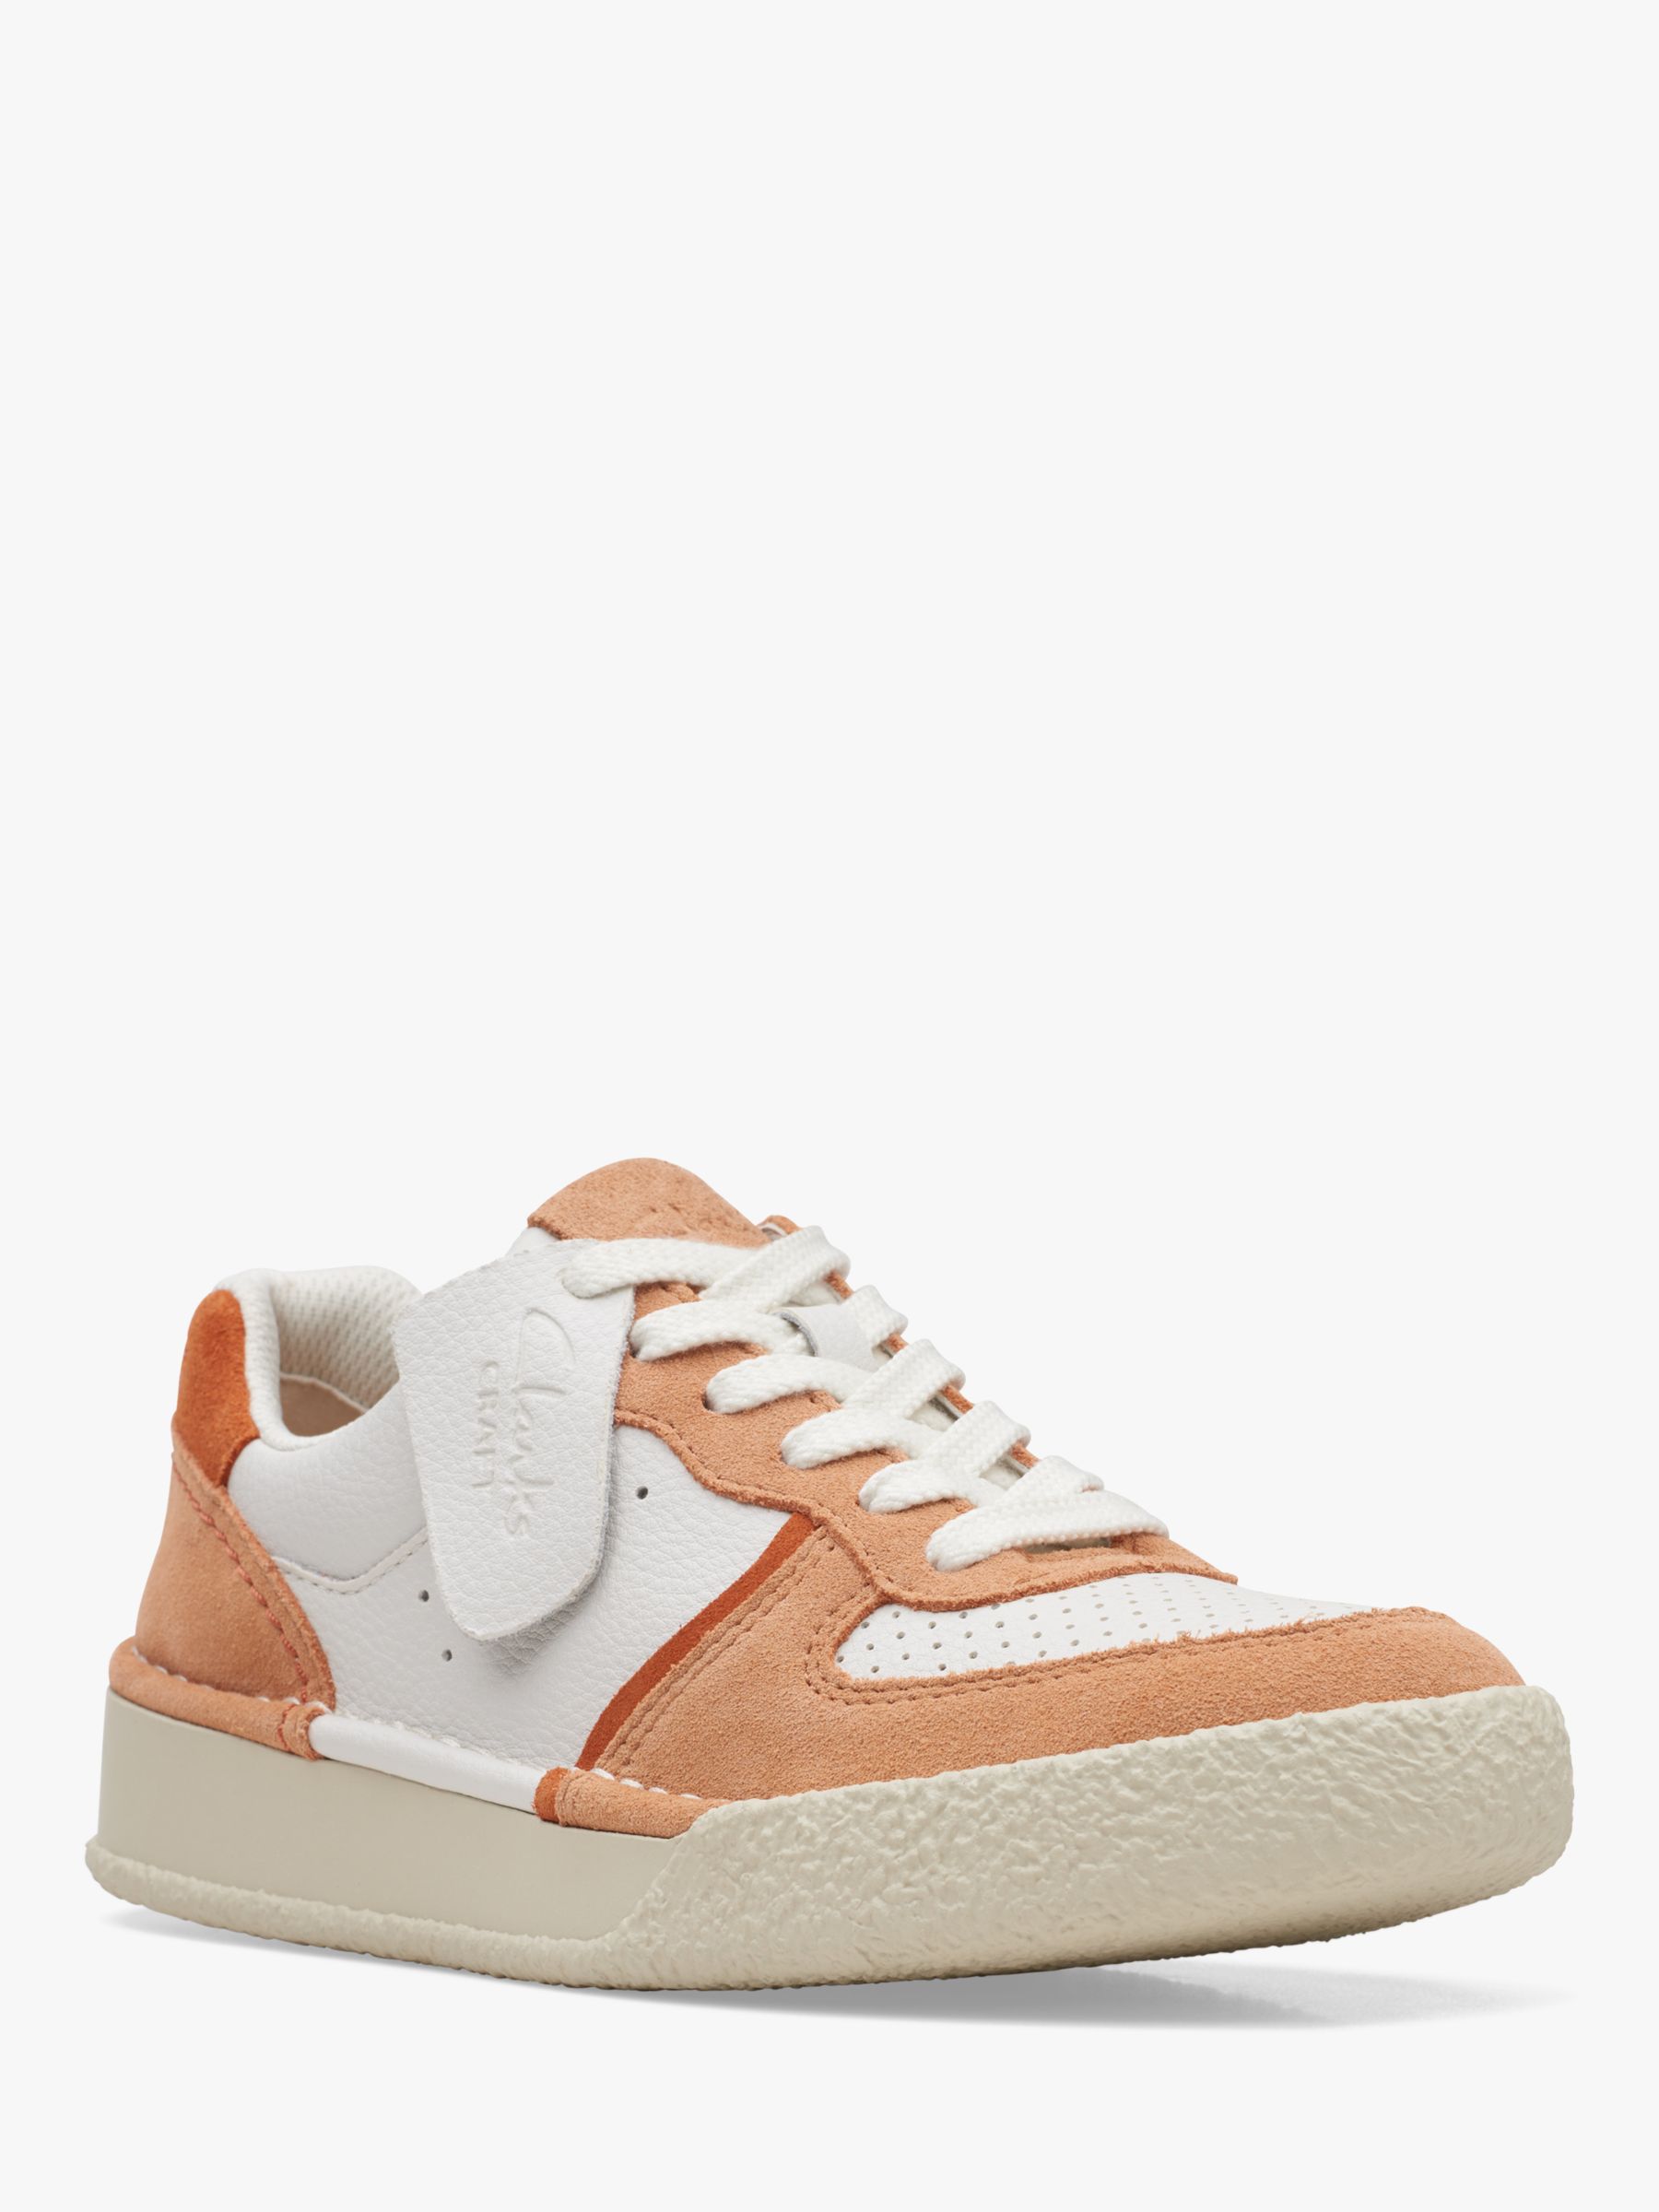 Clarks Craft Cup Court Trainers, Sandstone at John Lewis & Partners